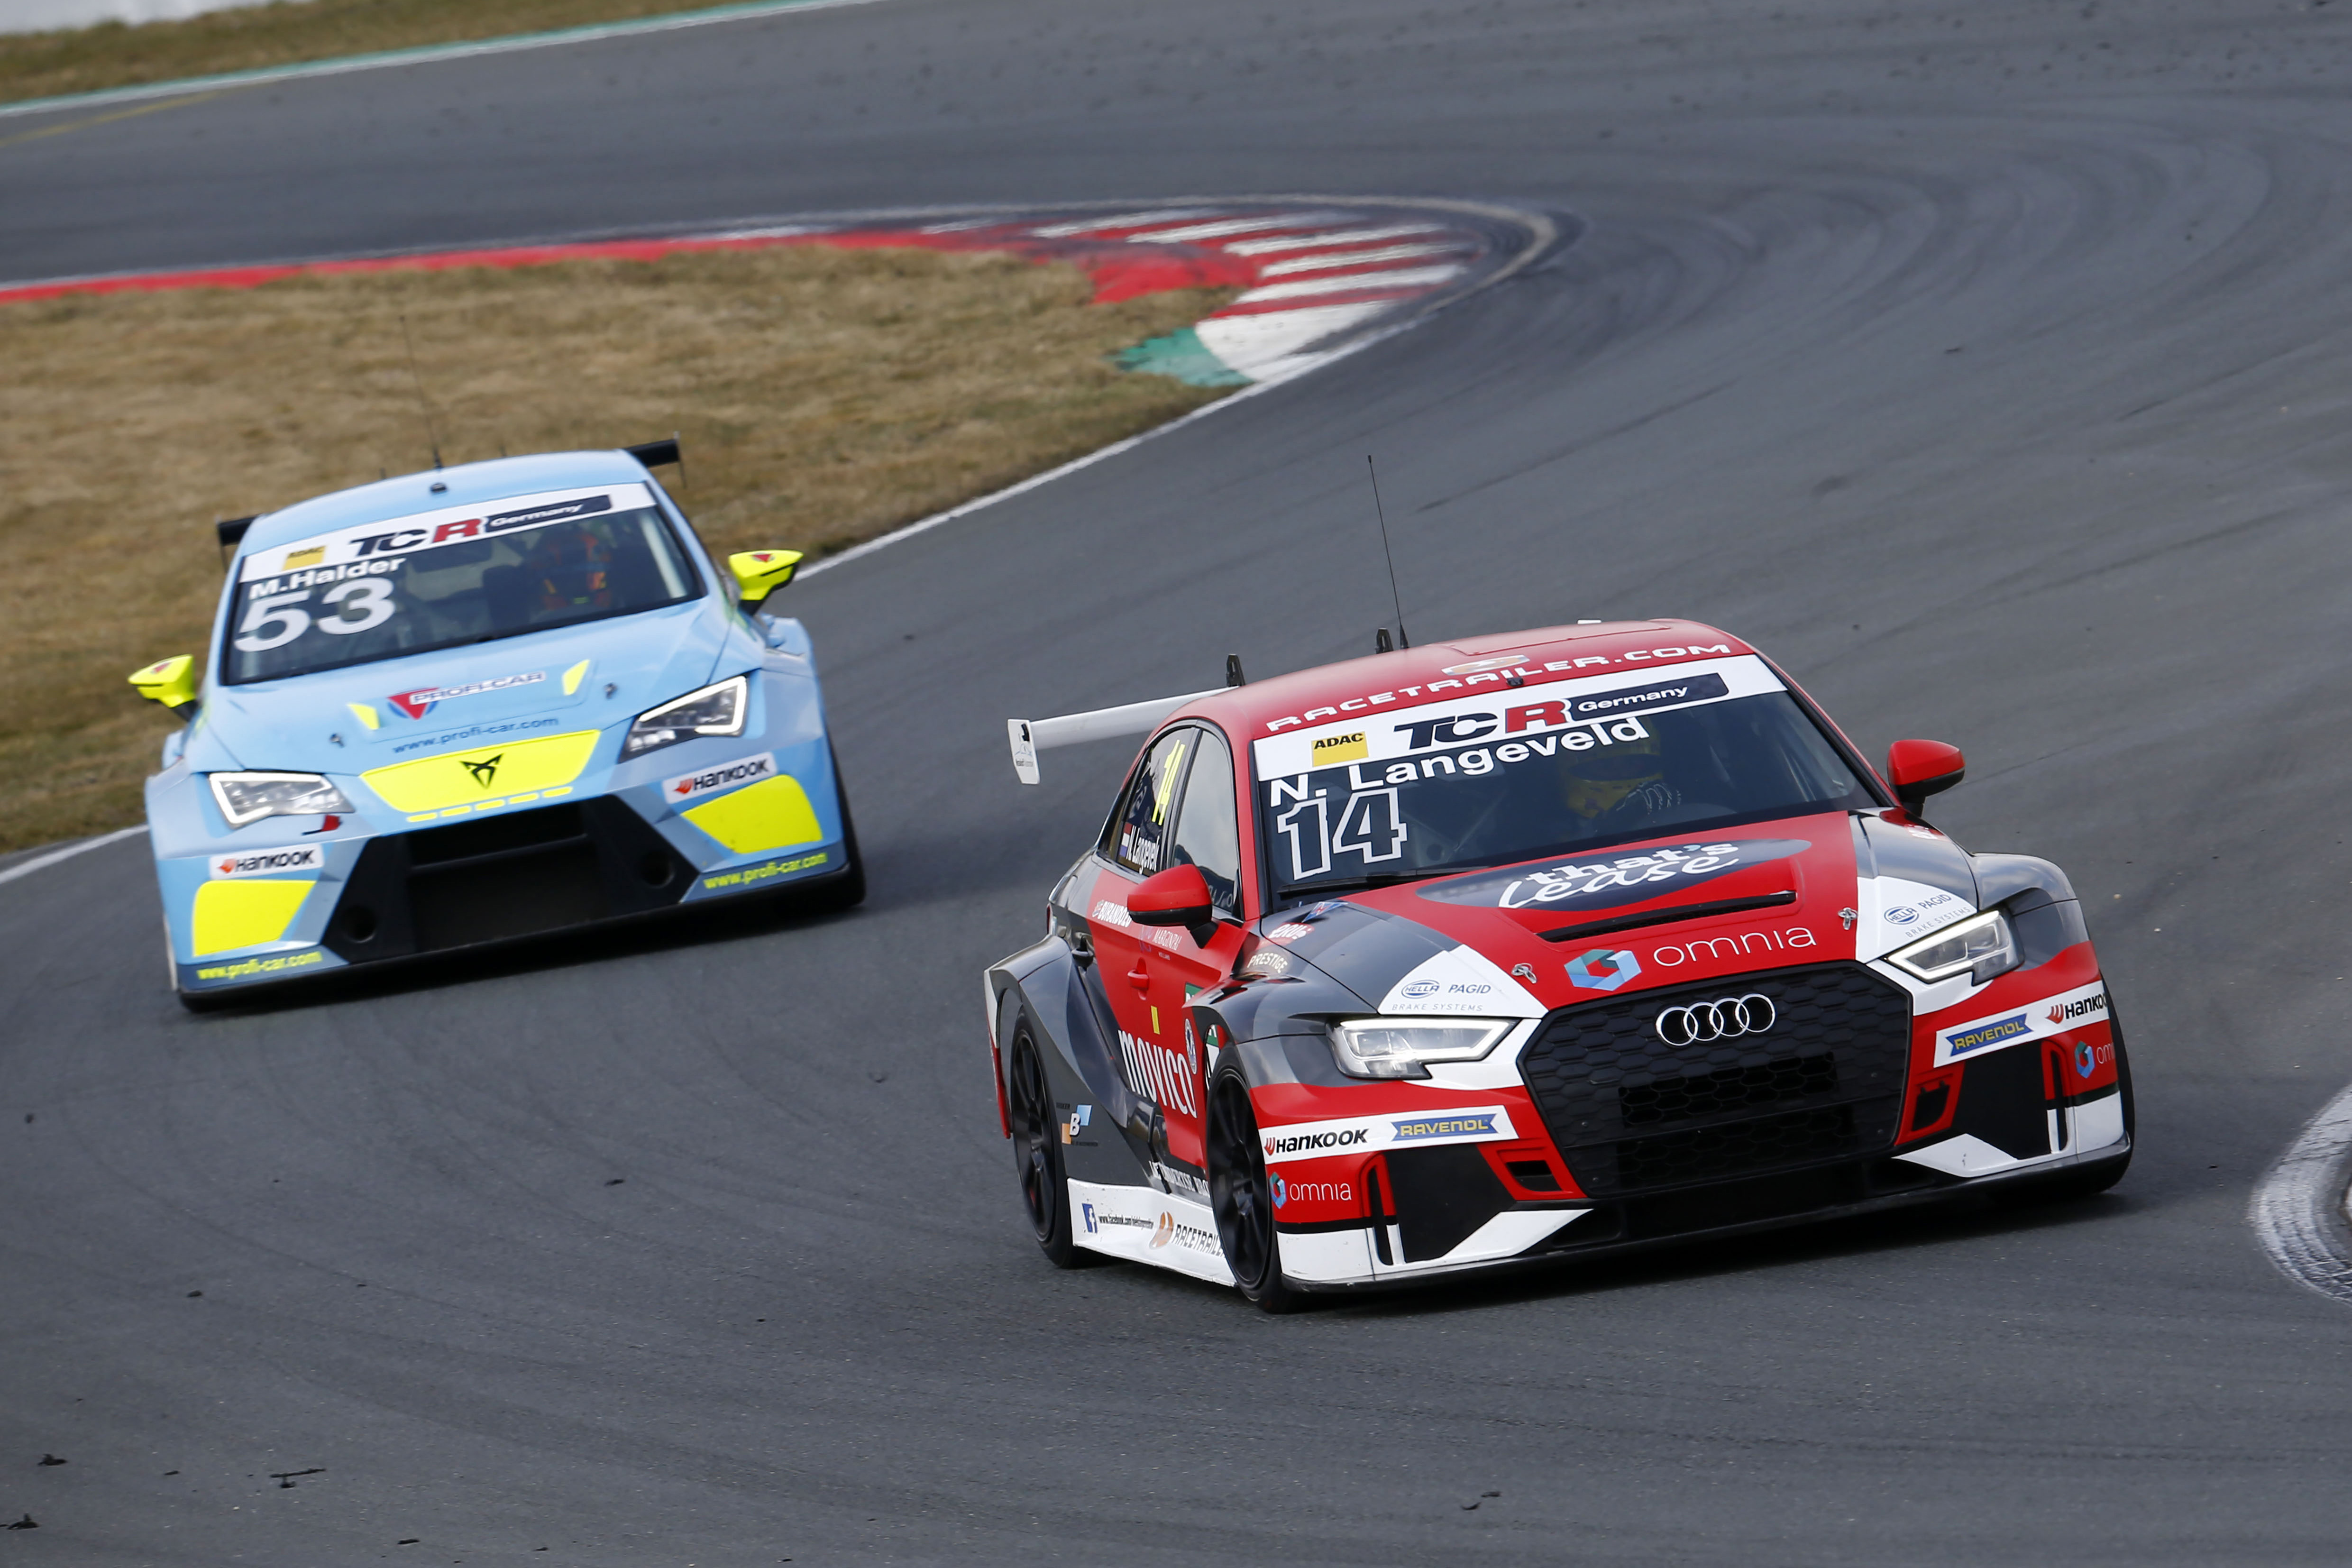 Langeveld leads an Audi 1-2-3 in Austrian Qualifying